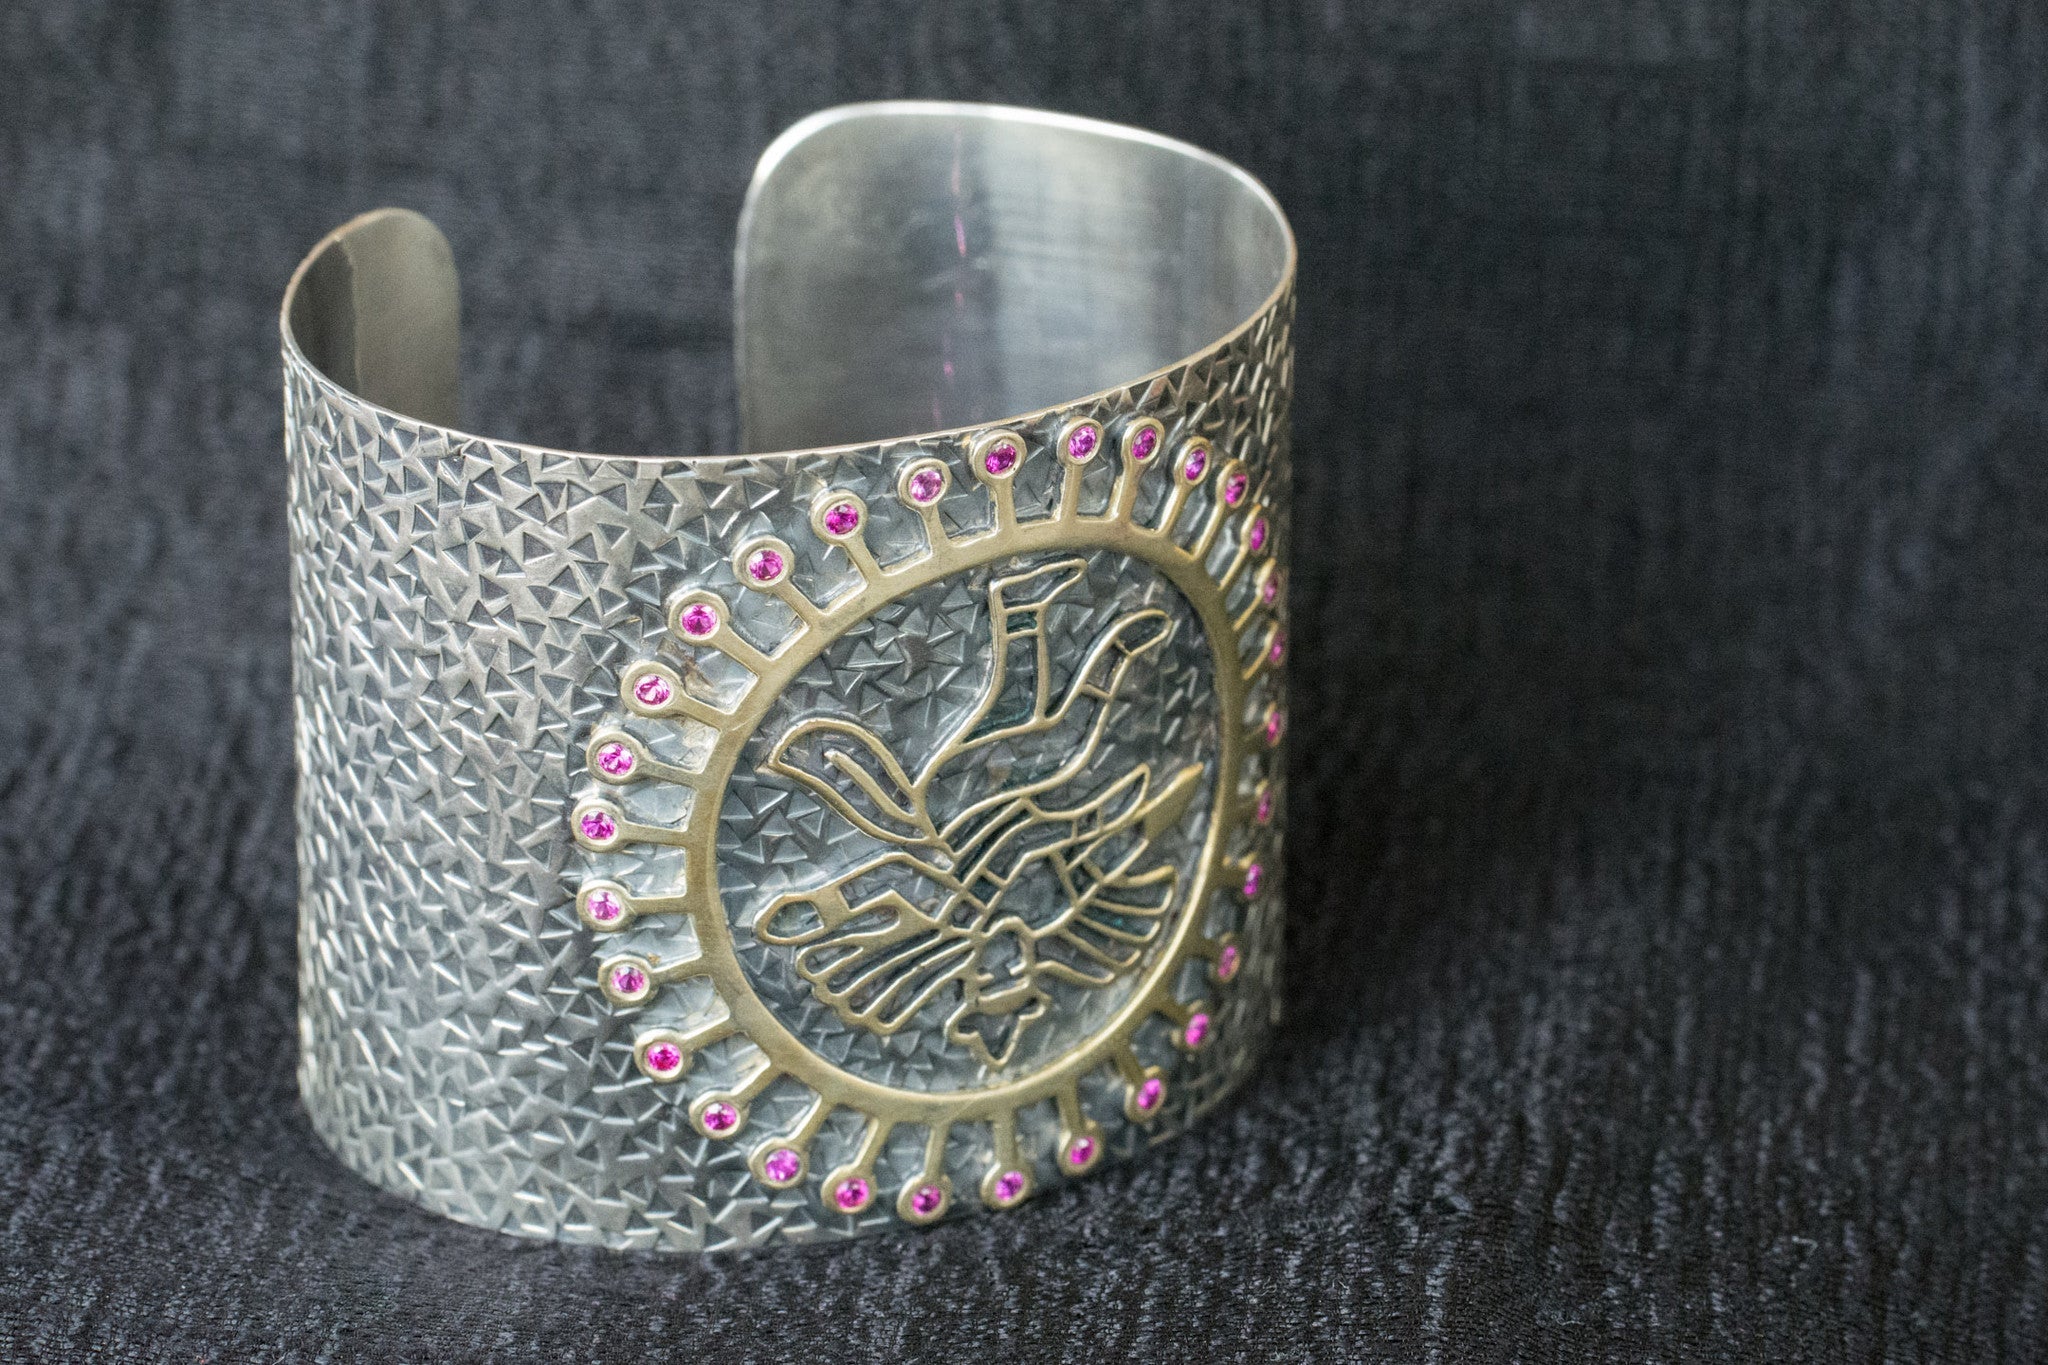 20a545-silver-gold-plated-amrapali-bracelet-two-tone-cuff-pink-zircon